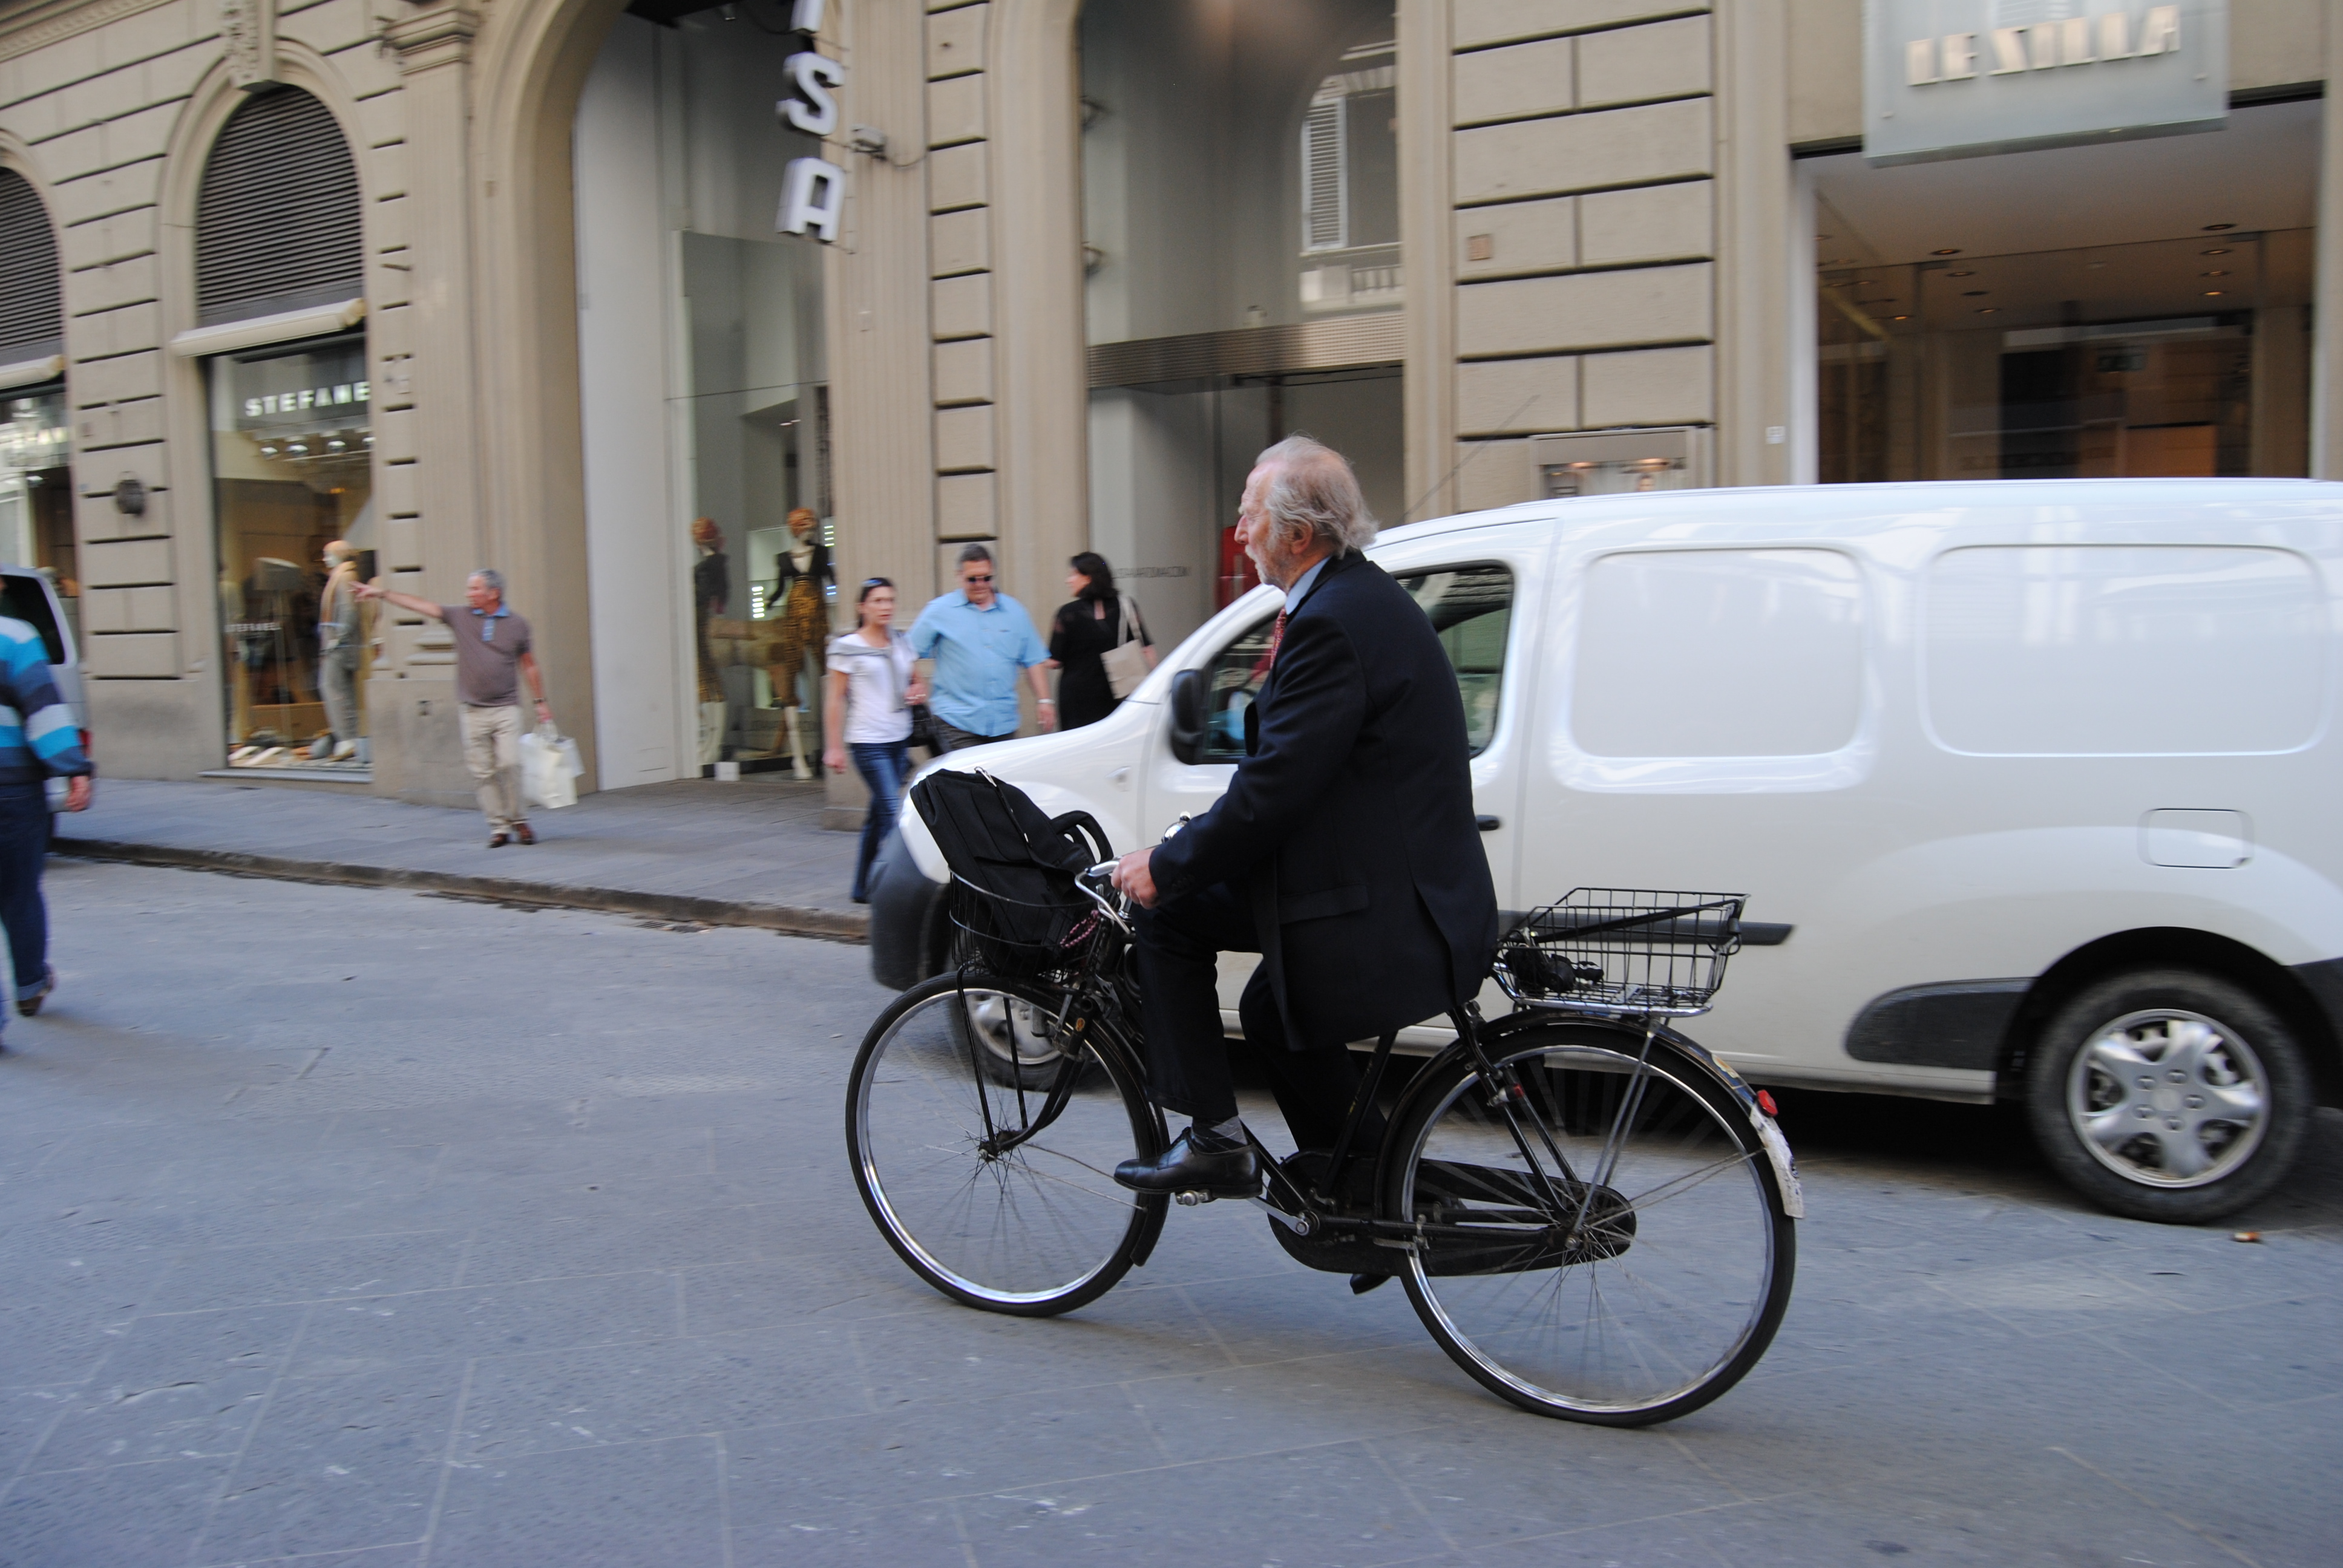 Man on bike in Florence Italy